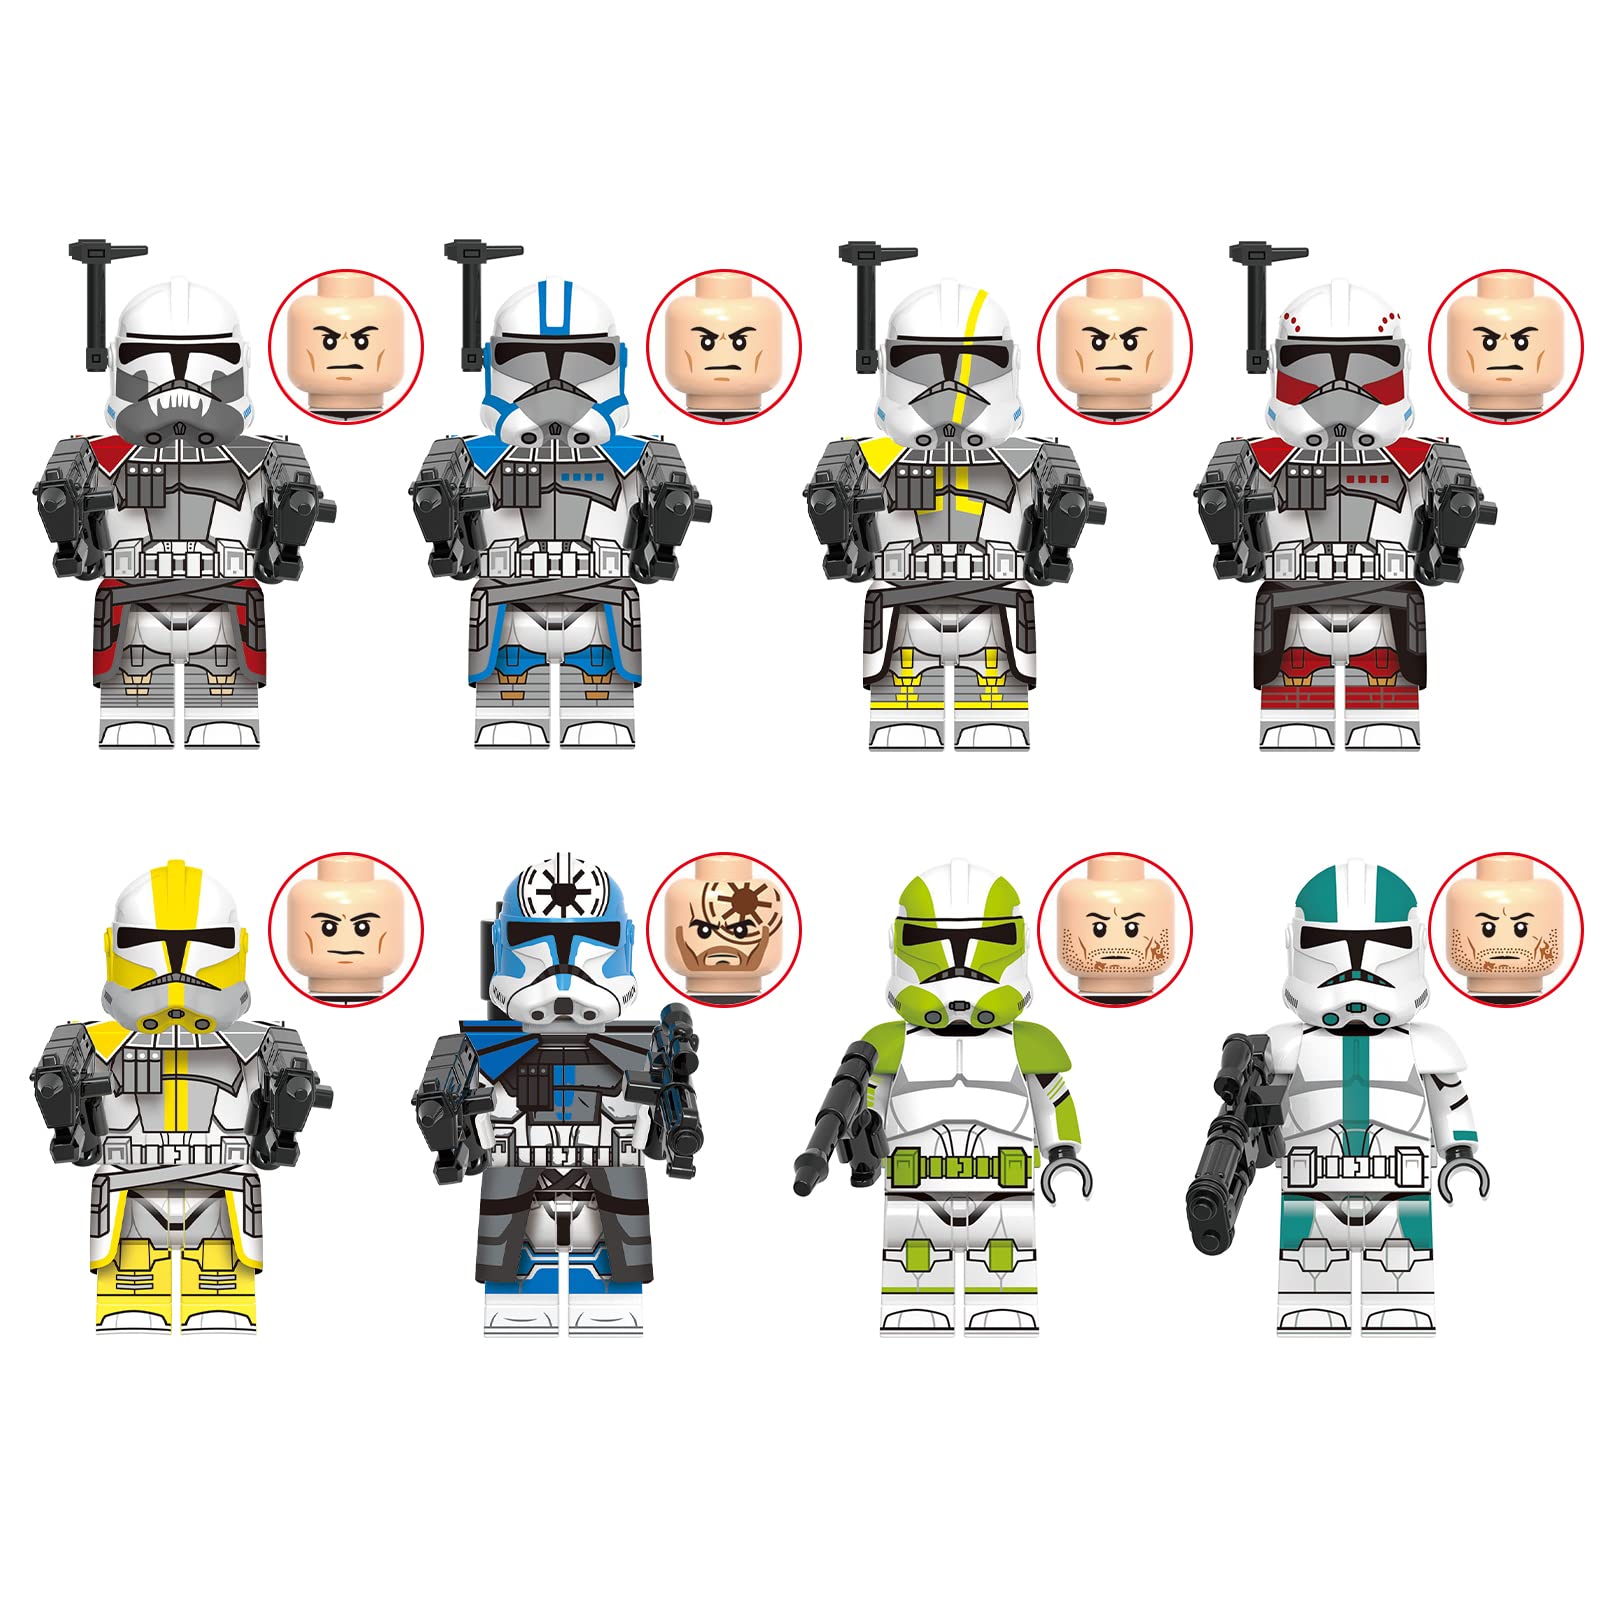 strawjoy Battle Droids 26 Pack Building Sets, Space Wars Clone Troopers Commander Army Collectible Action Figure Kids Toy Gifts